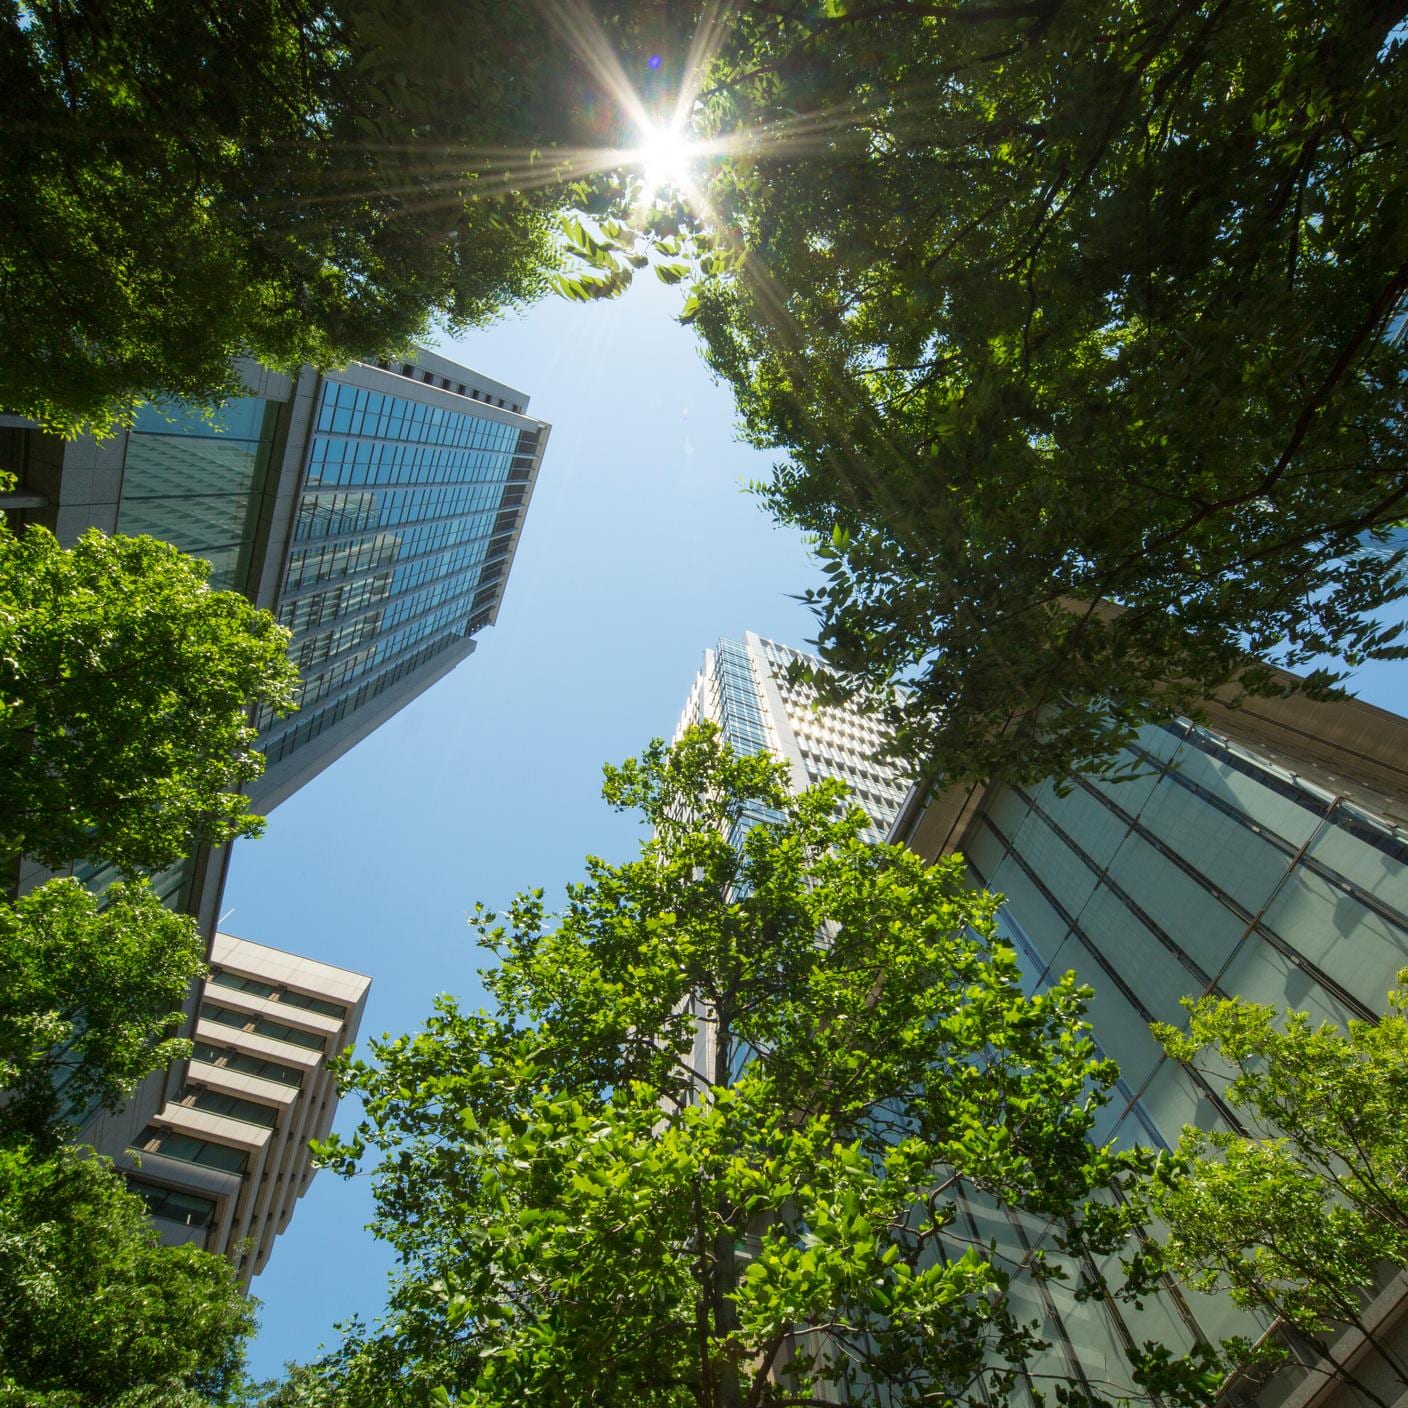 Urban green, low angle view of buildings with greenery